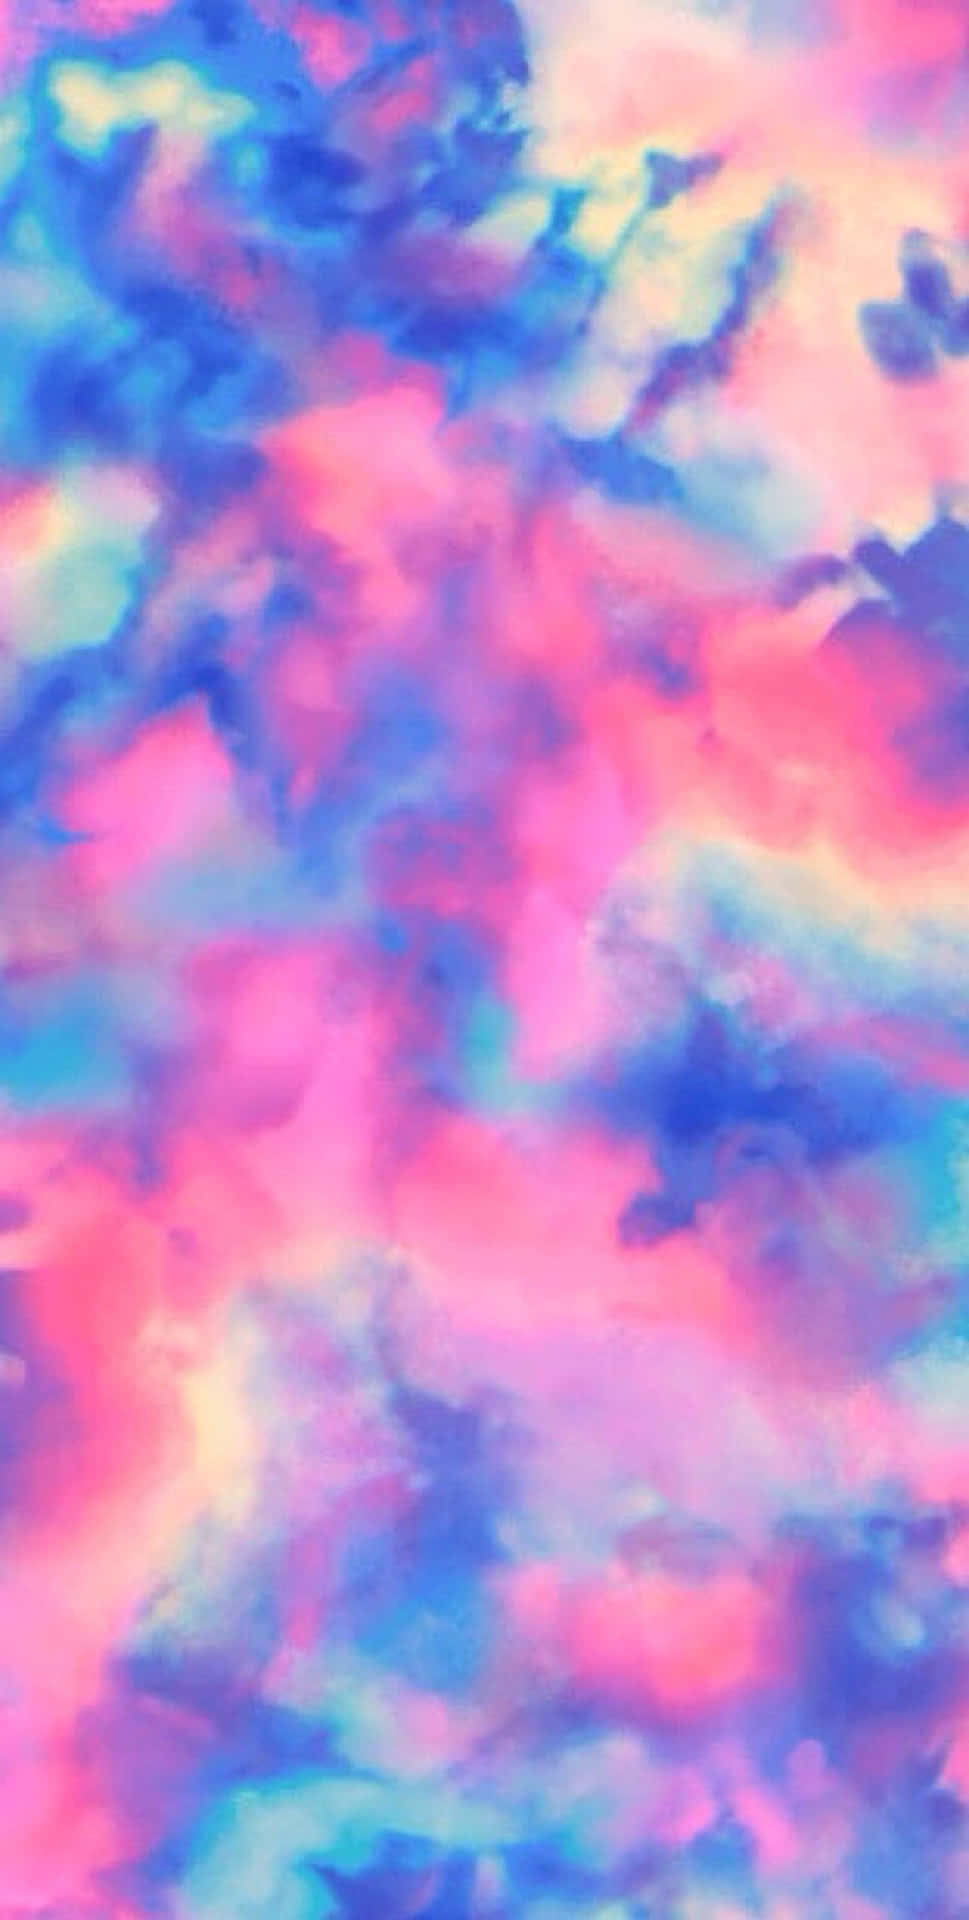 A Colorful Painting Of Clouds On A Blue Background Wallpaper